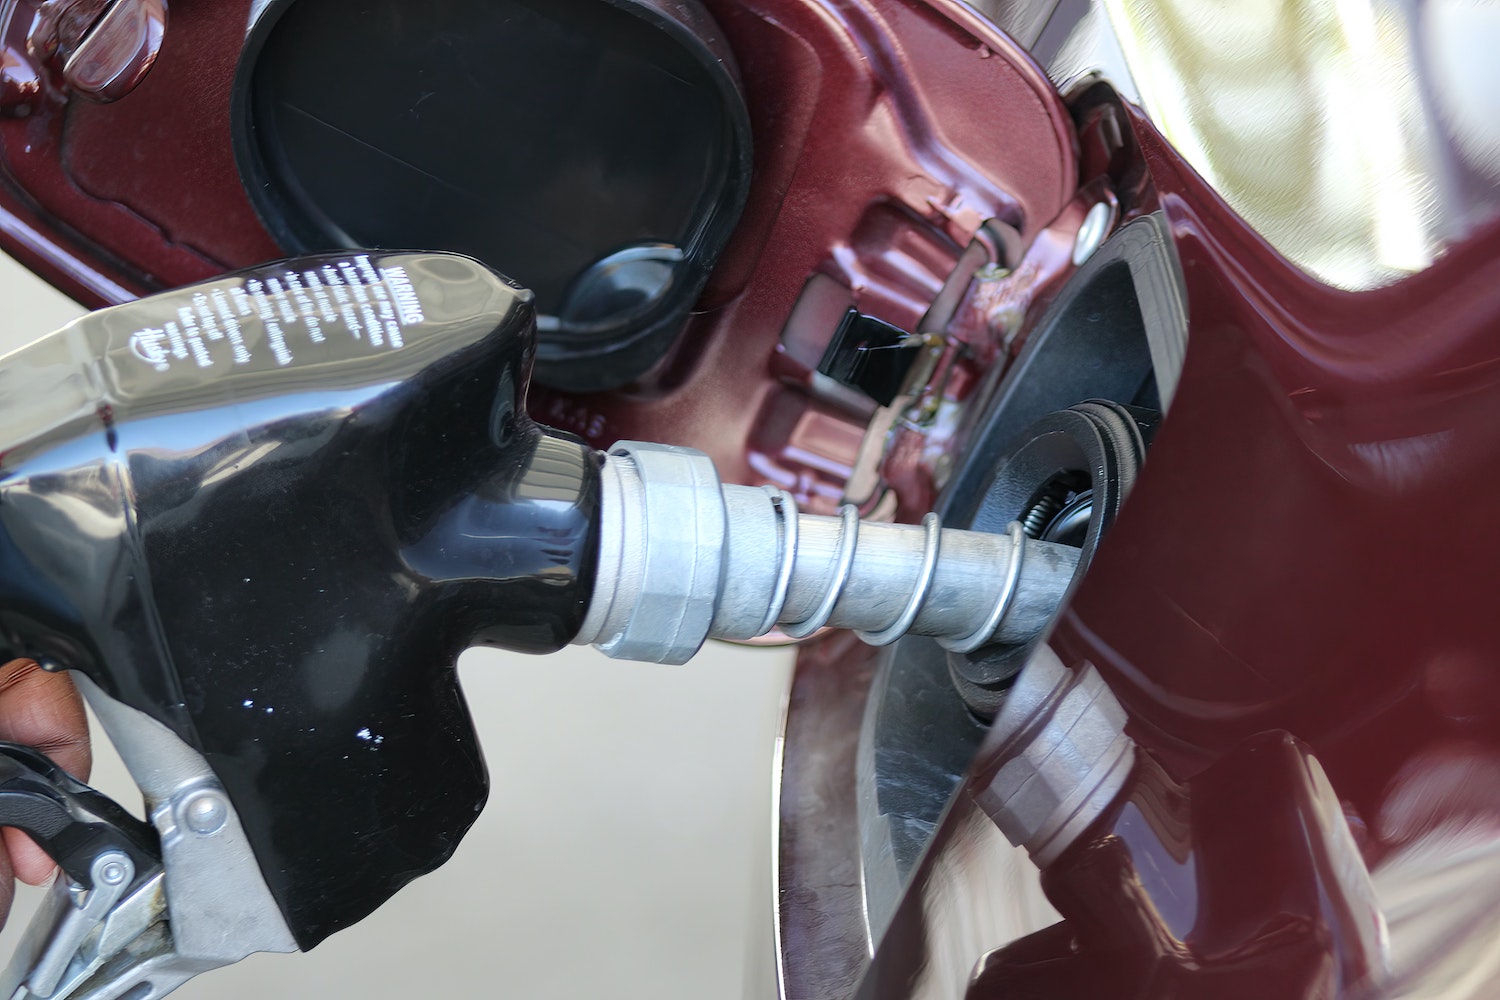 Closeup of a driver's hand pumping gas into the half full tank of their car.